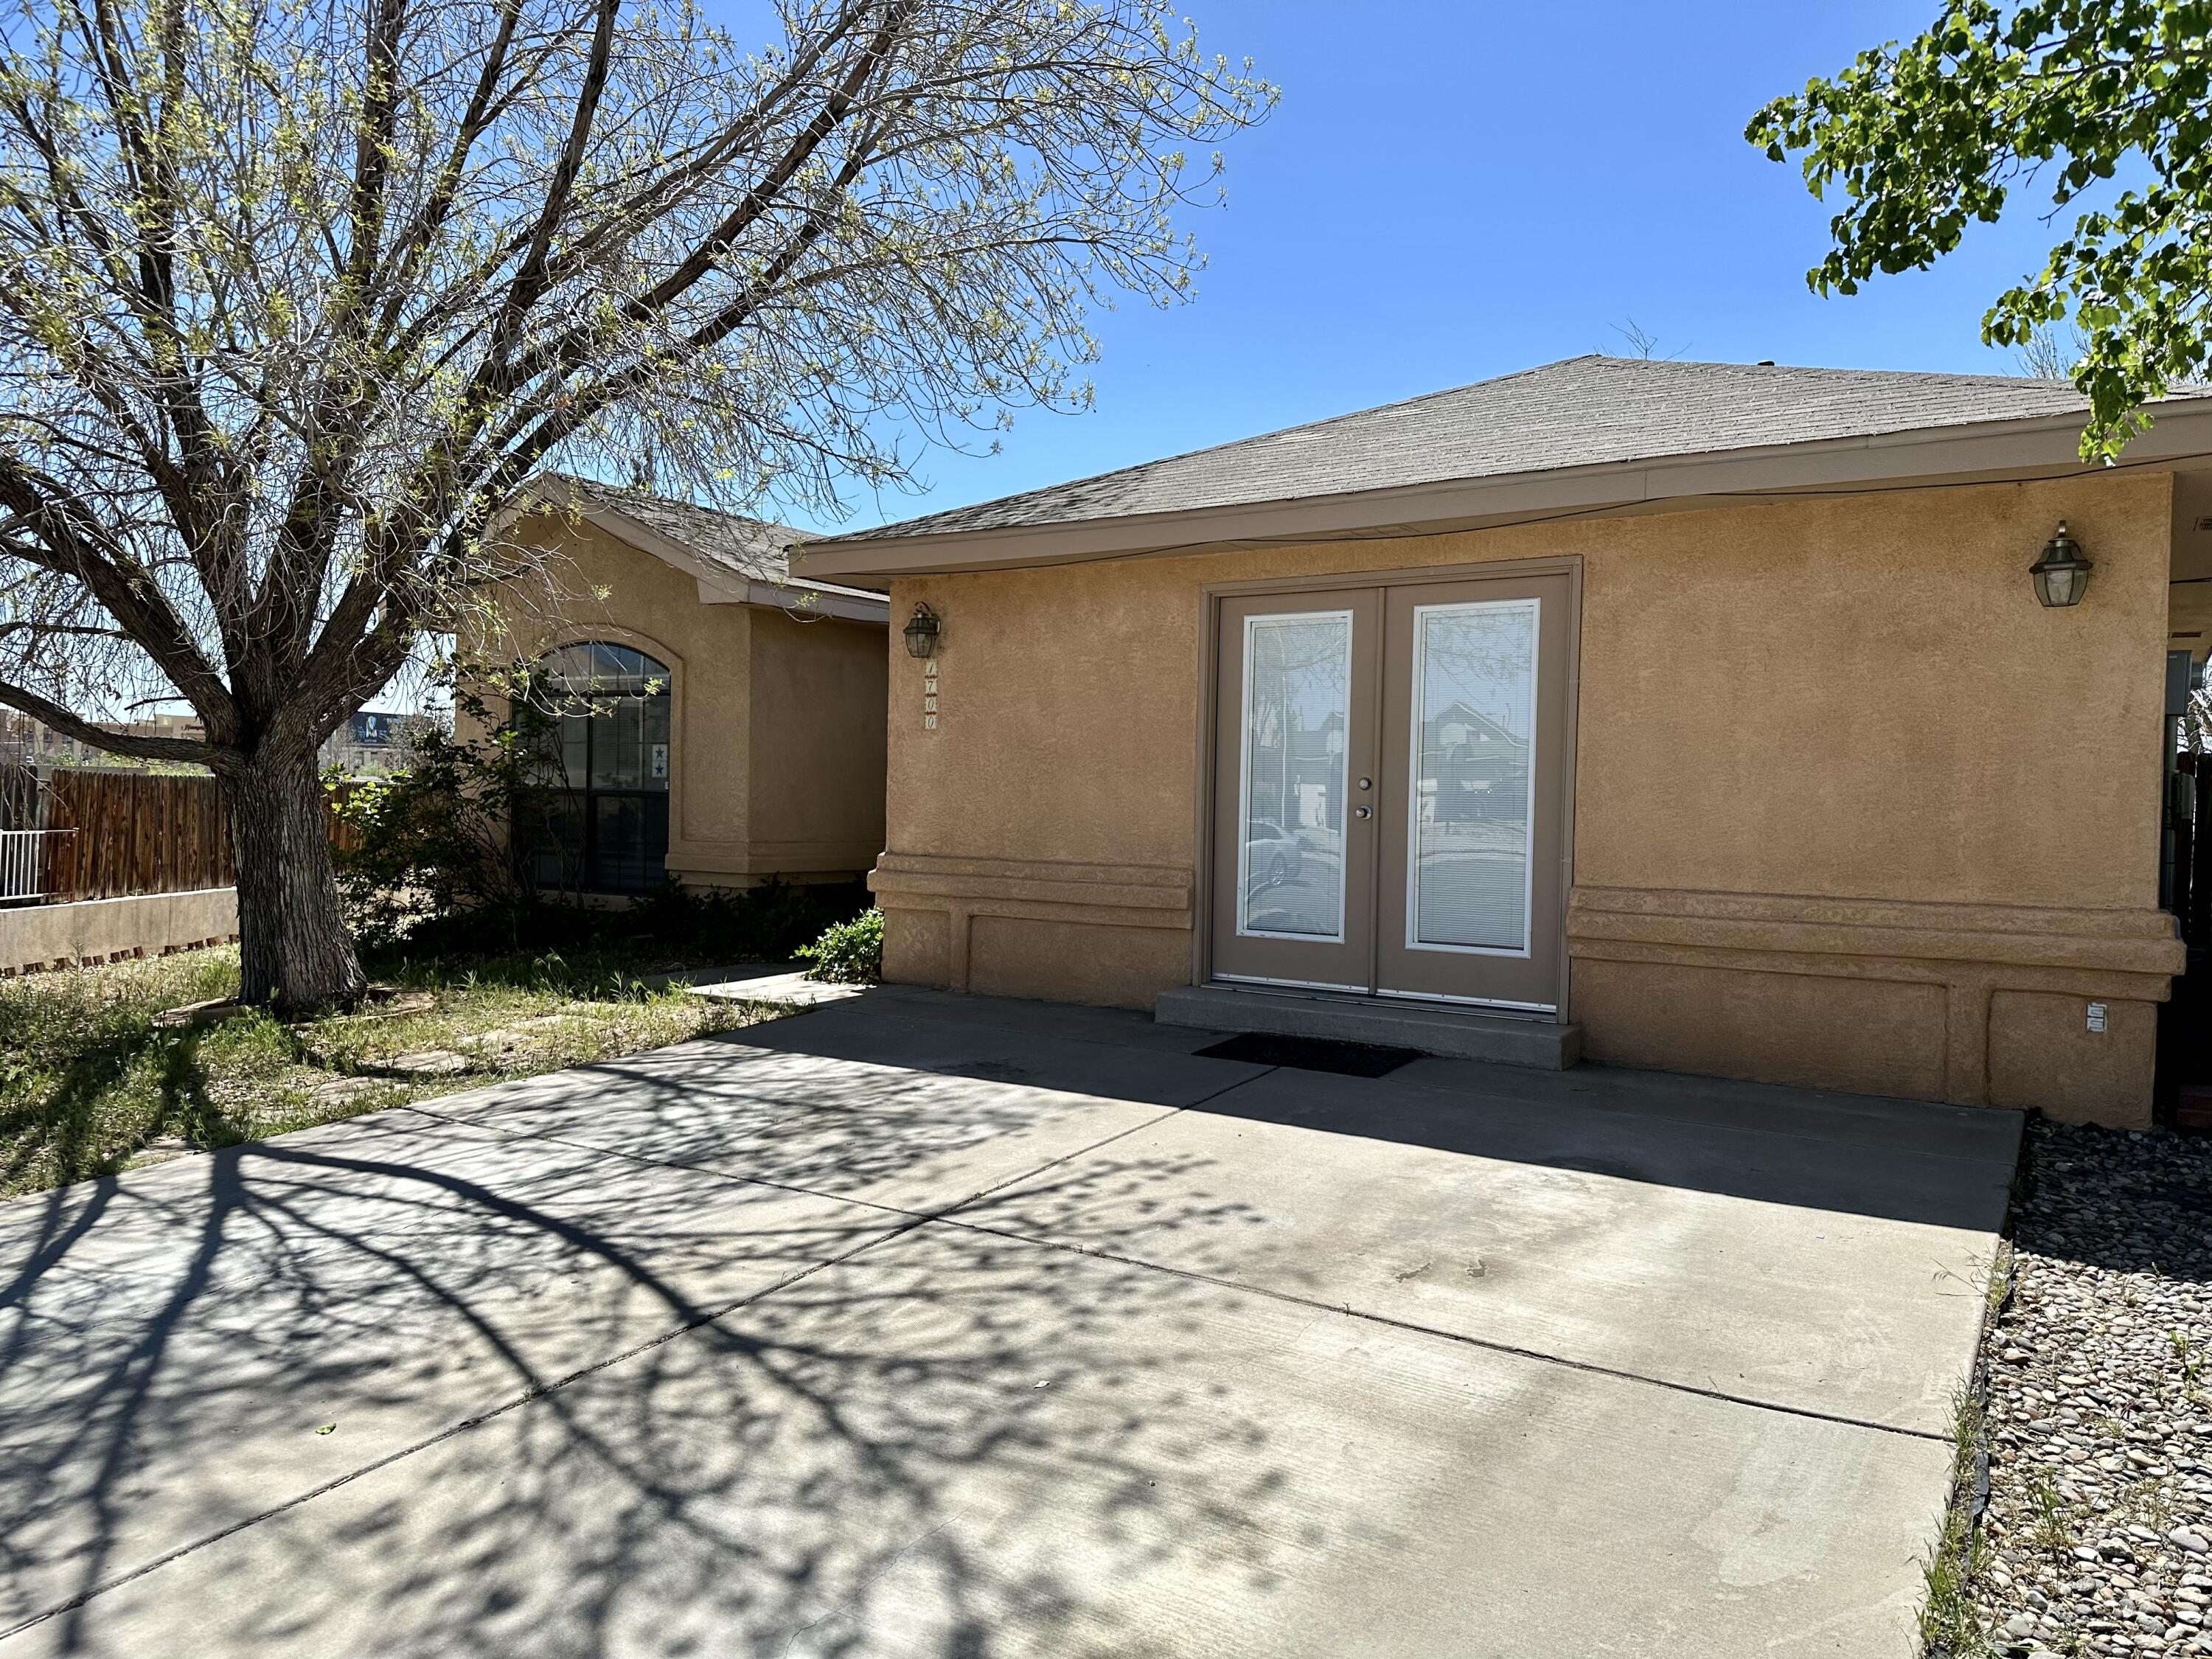 Wonderful west side home has 3 bedrooms, 2 bathrooms and 2 living areas! New paint in bedrooms and main living area and new carpet in bedroom. New Kitchen Microwave! Easy access to freeway, close distance to restaurants, shopping and schools. Come check this cozy home out before it is gone!